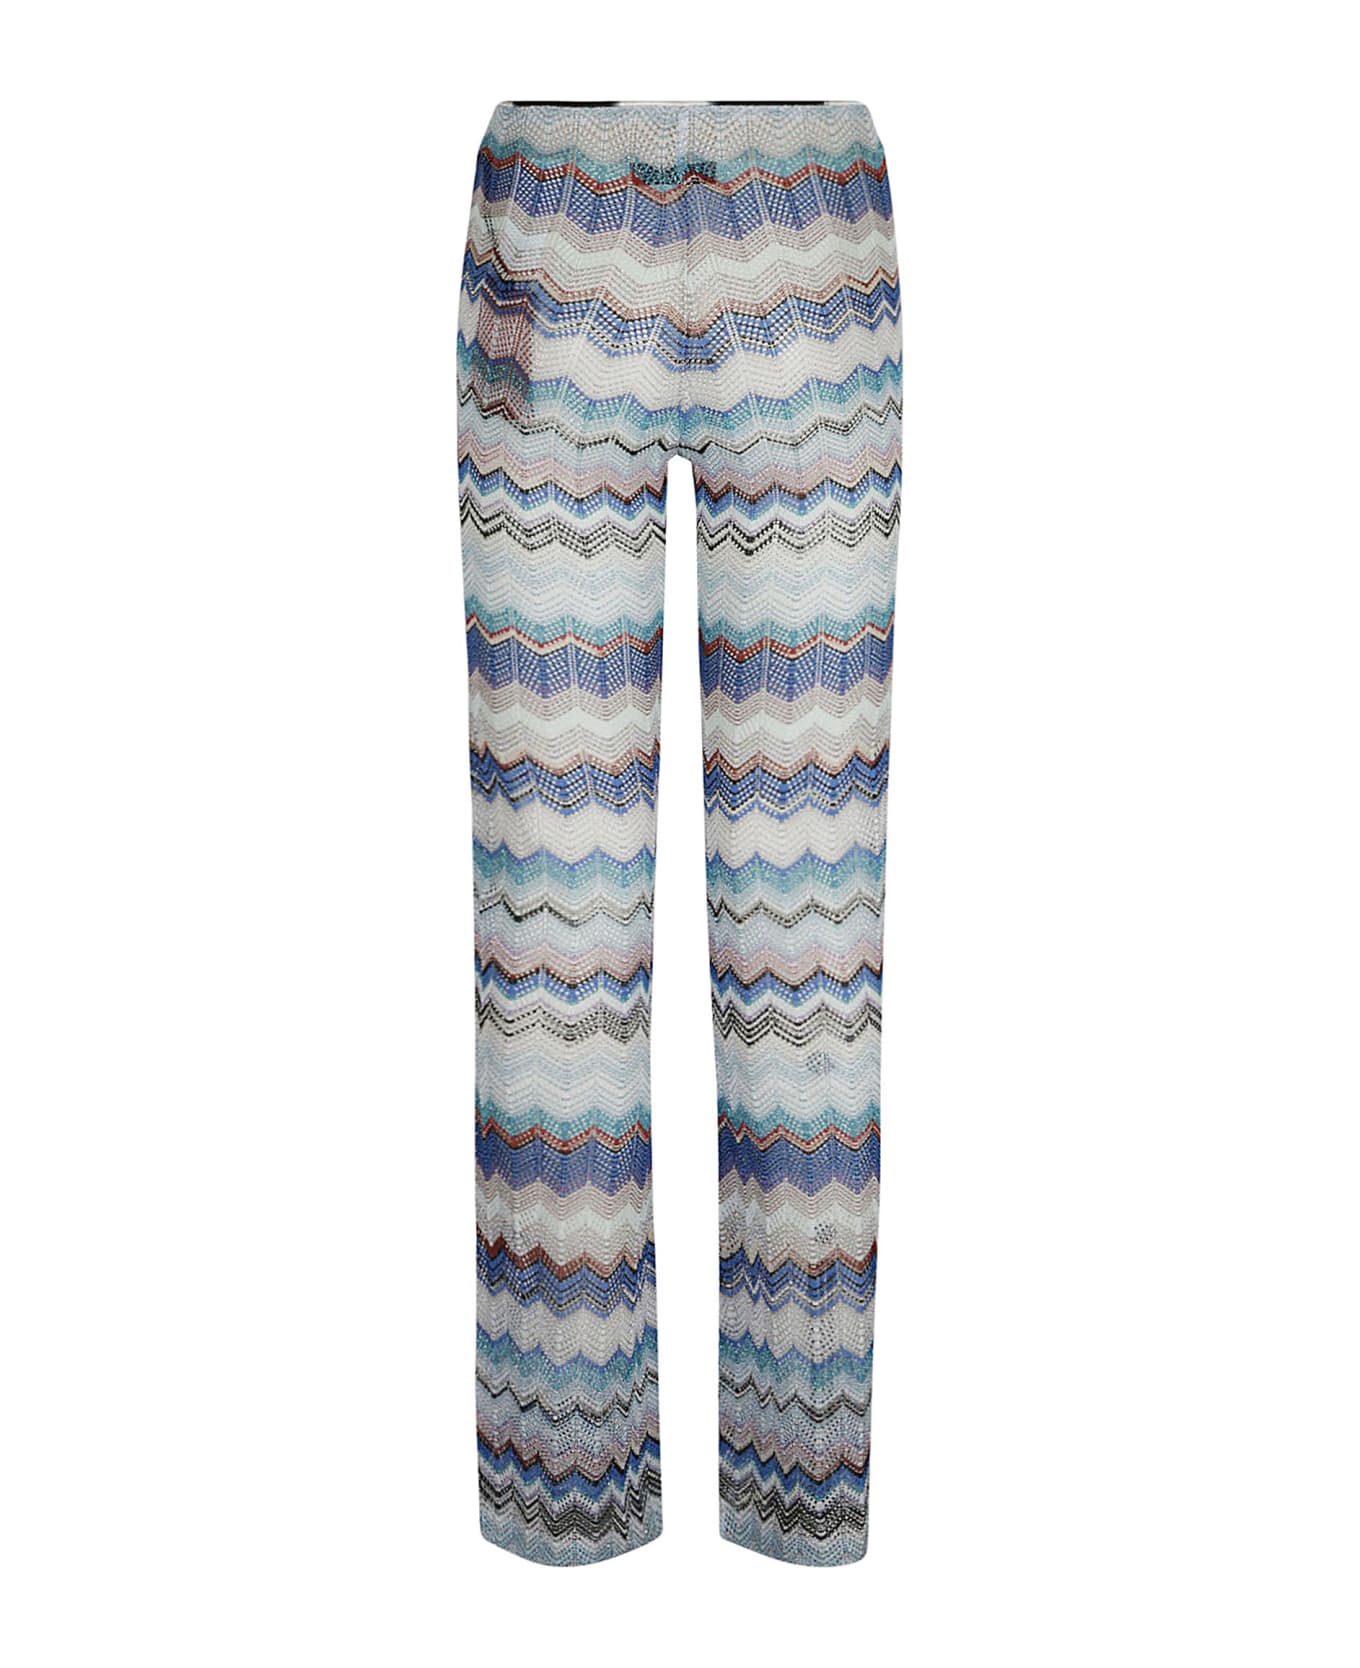 Missoni Zig-zag Patterned Trousers - Multicolor